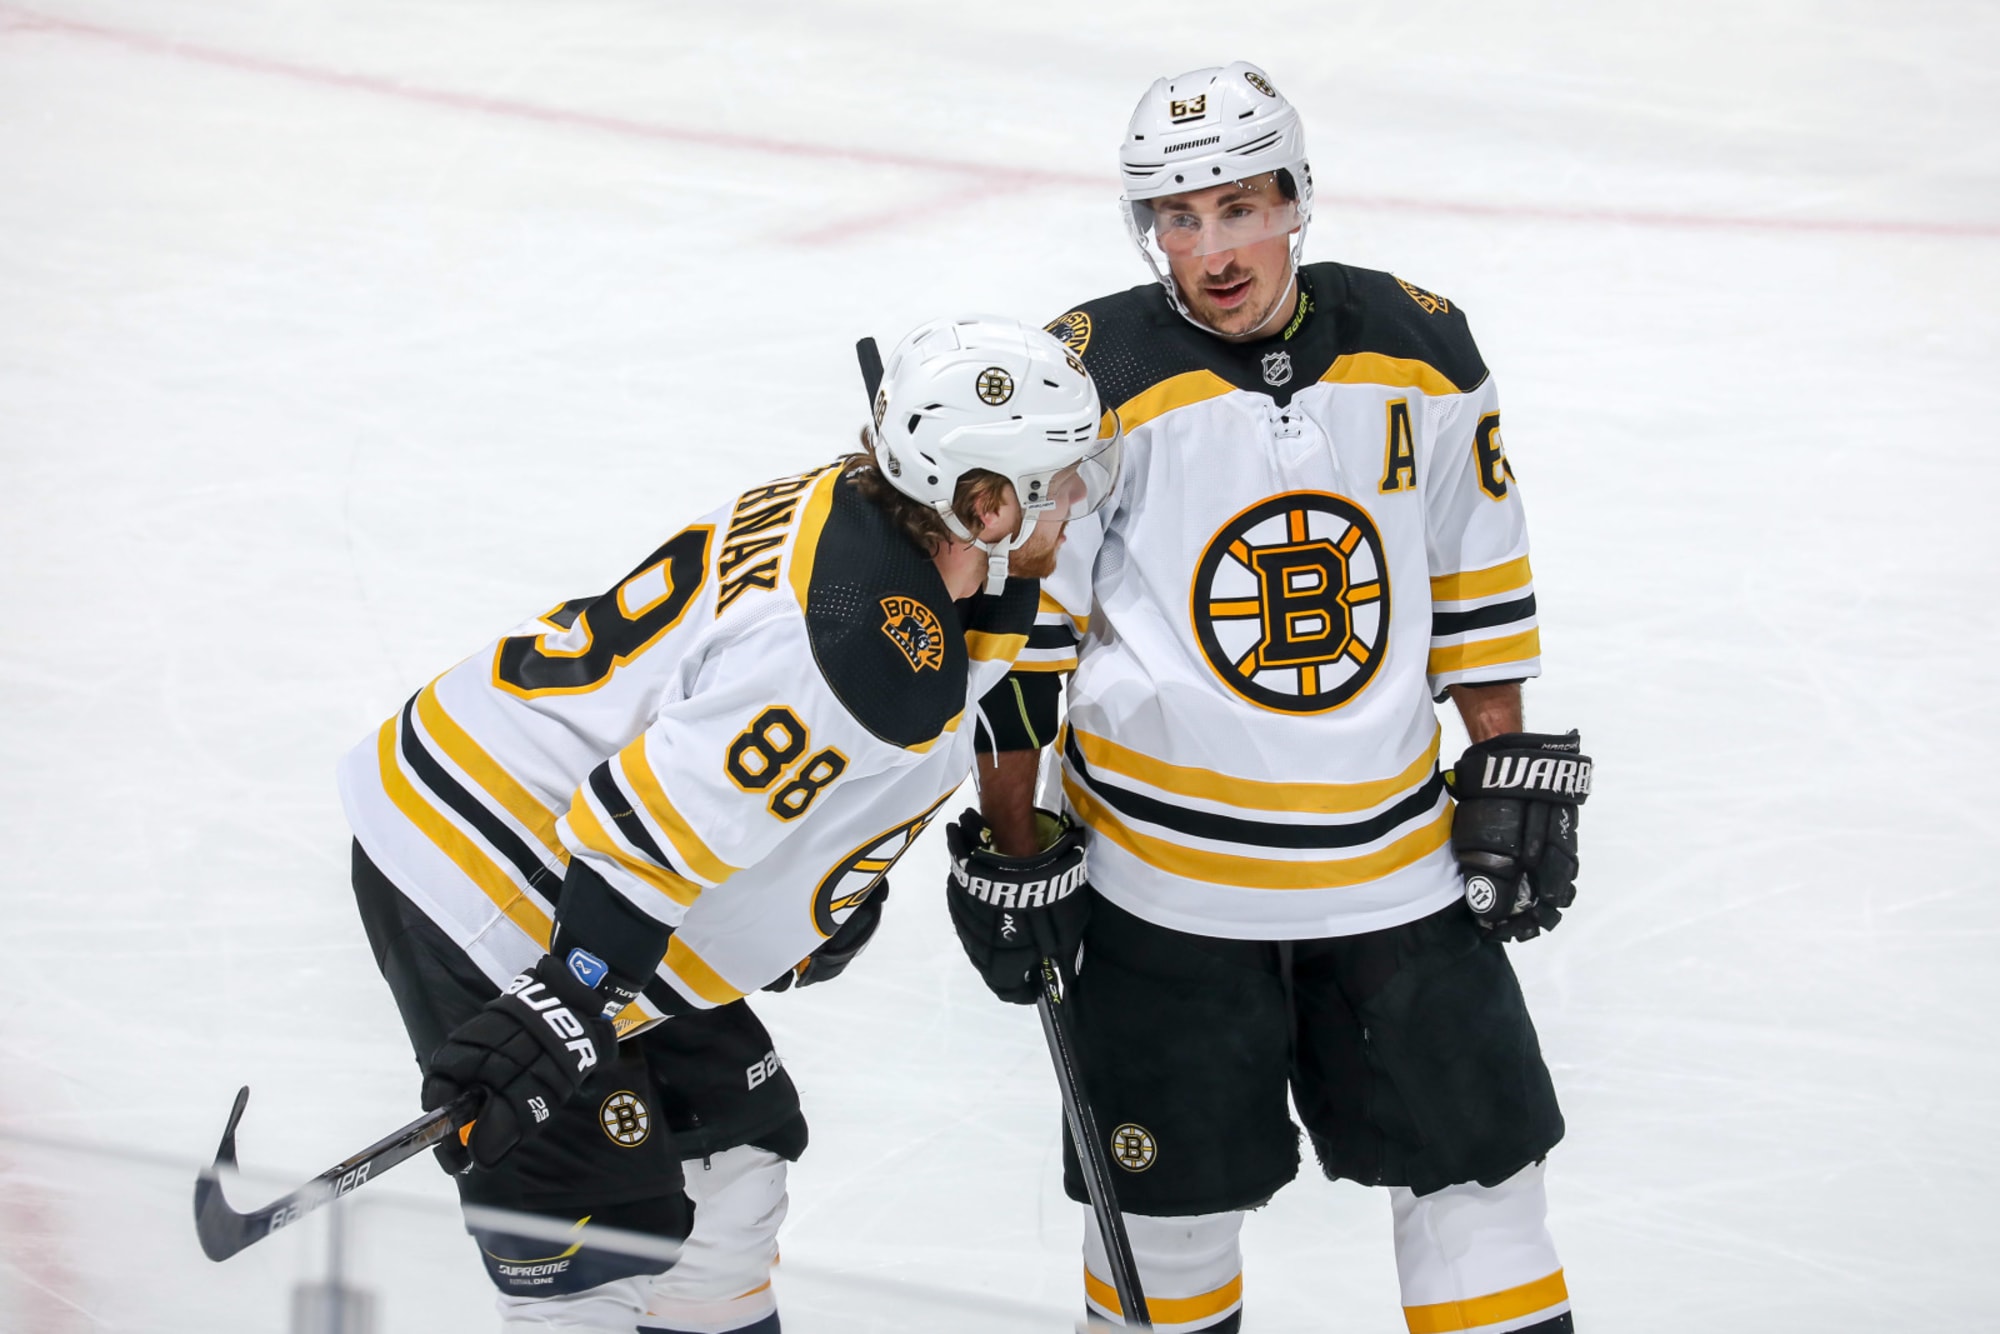 Sweeney Says Bruins 'Waiting for Chara to Initiate